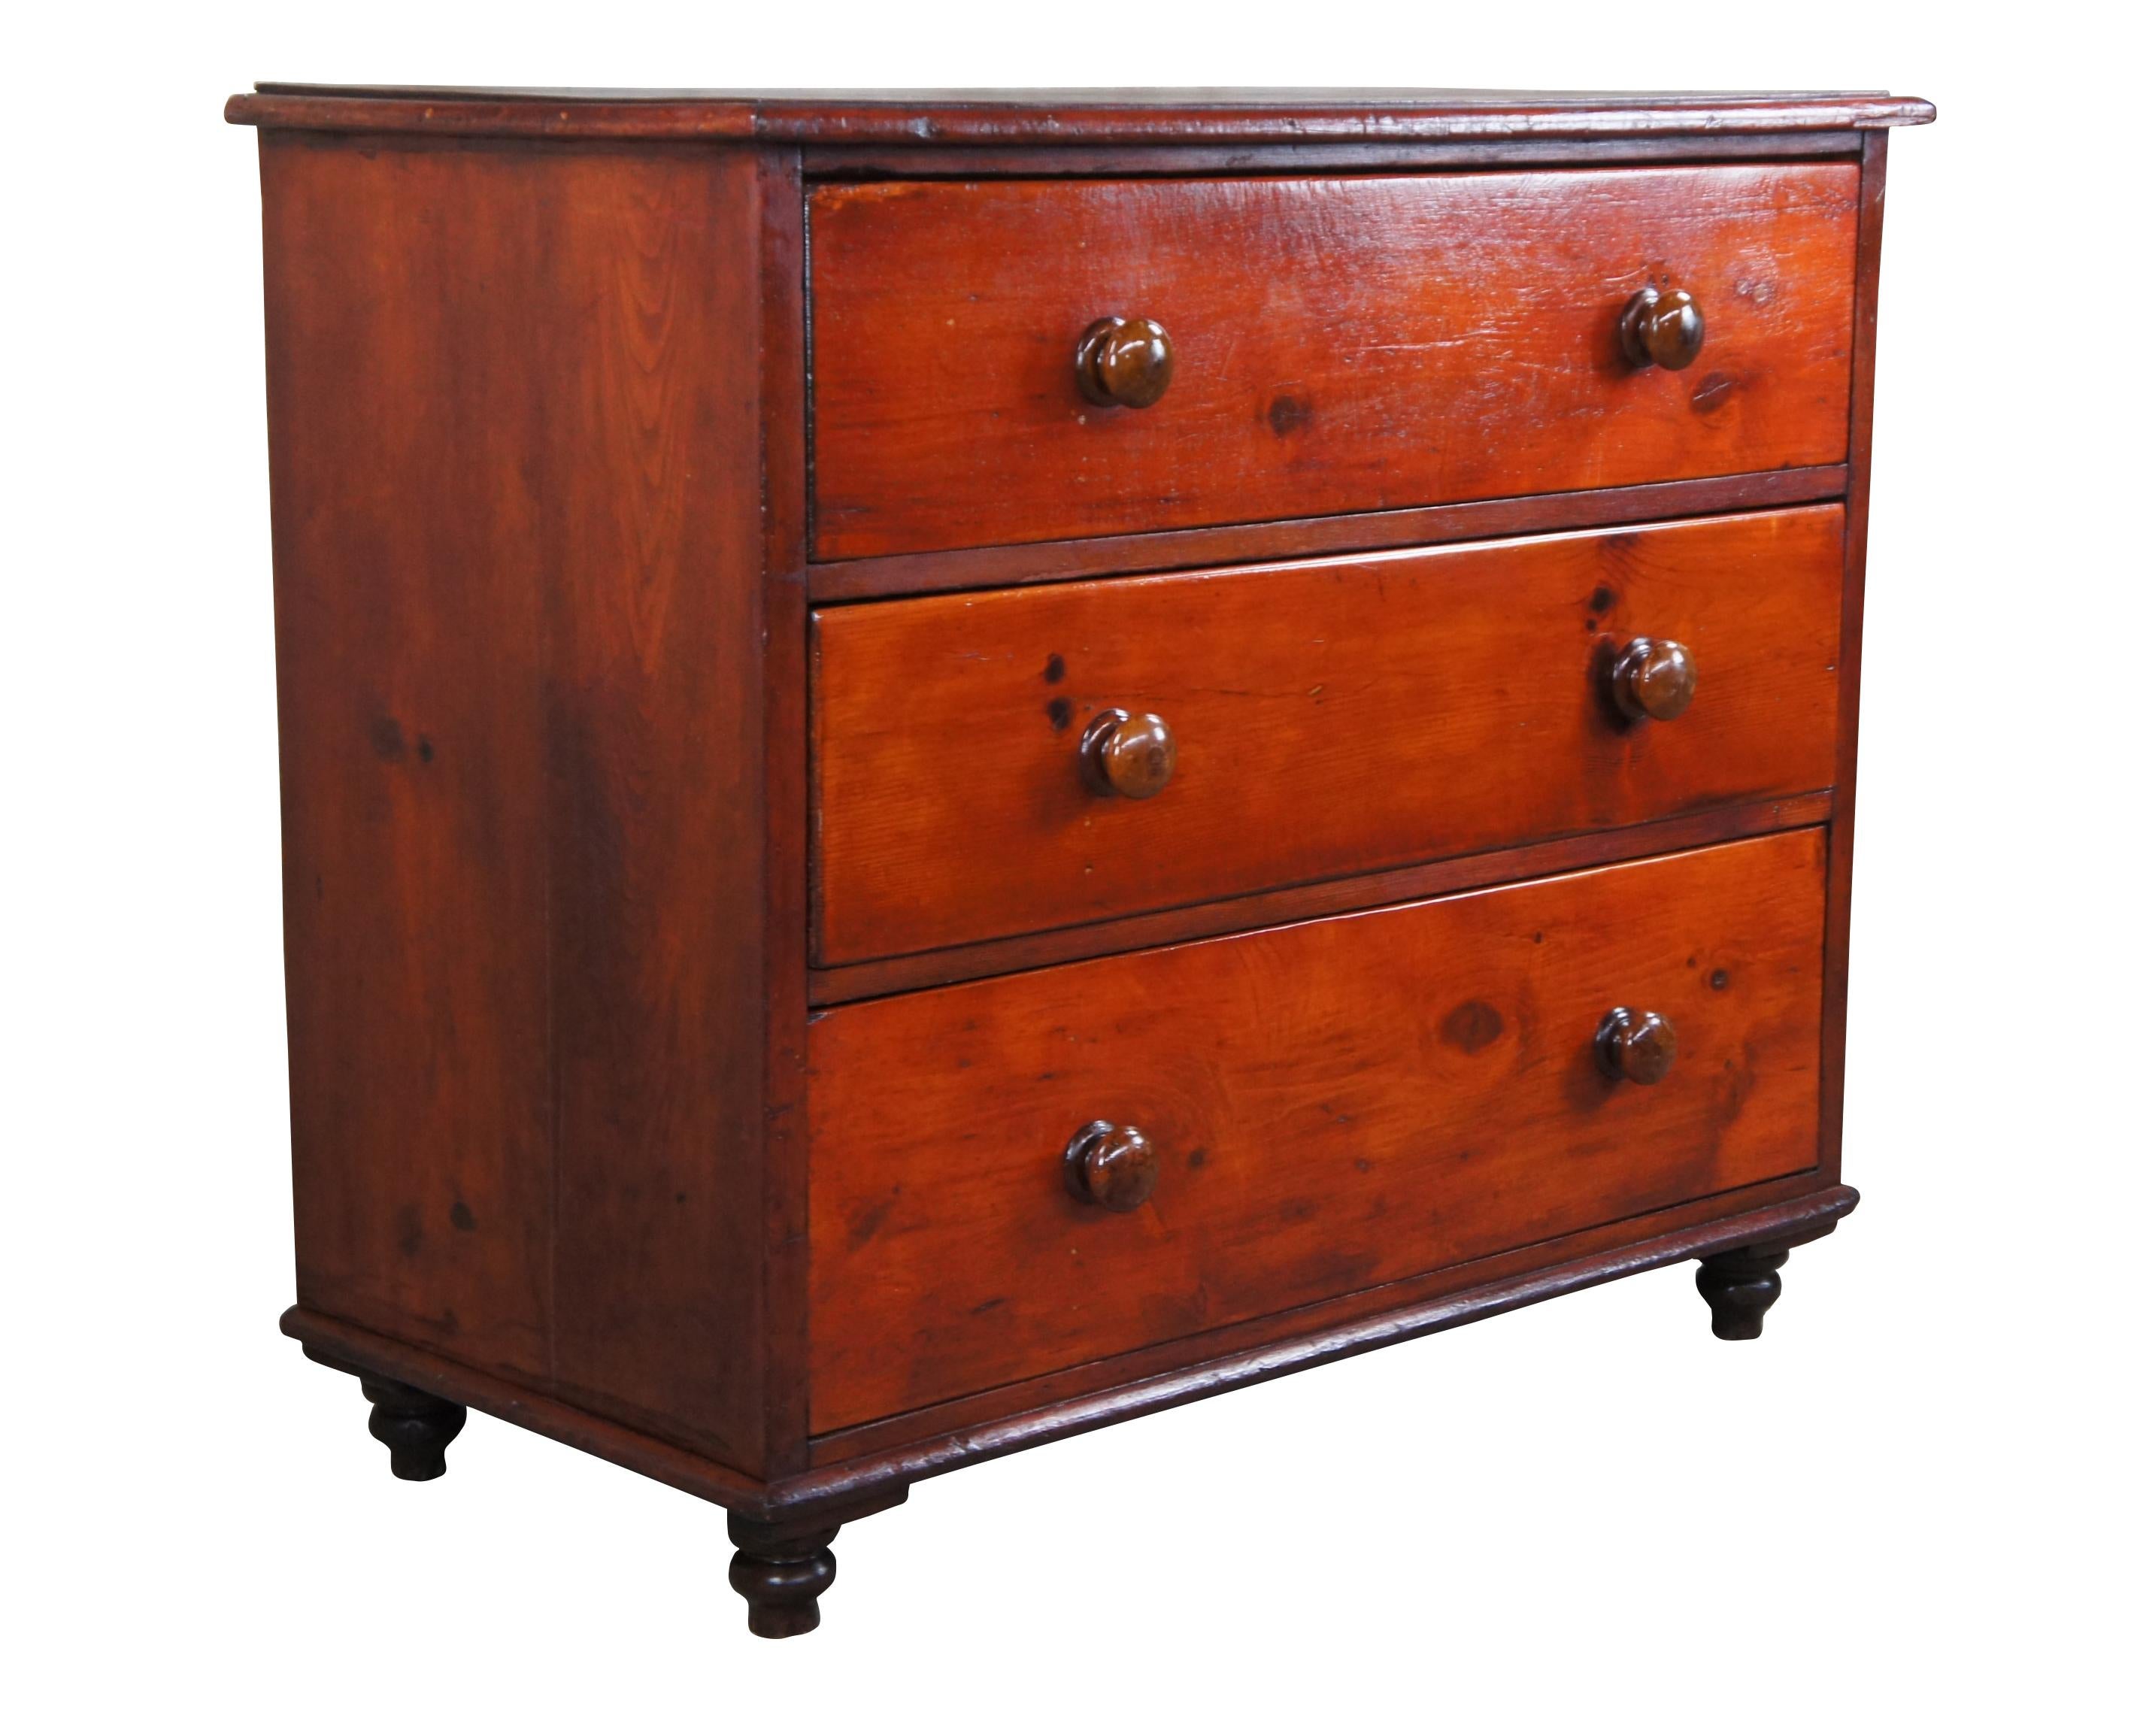 English pine chest of drawers, circa 1870s. Features a glowing patina with three hand dovetailed divided drawers and wooden turned handles. The case is supported by hand turned peg legs. Great for use in an entry or as a console. A charming